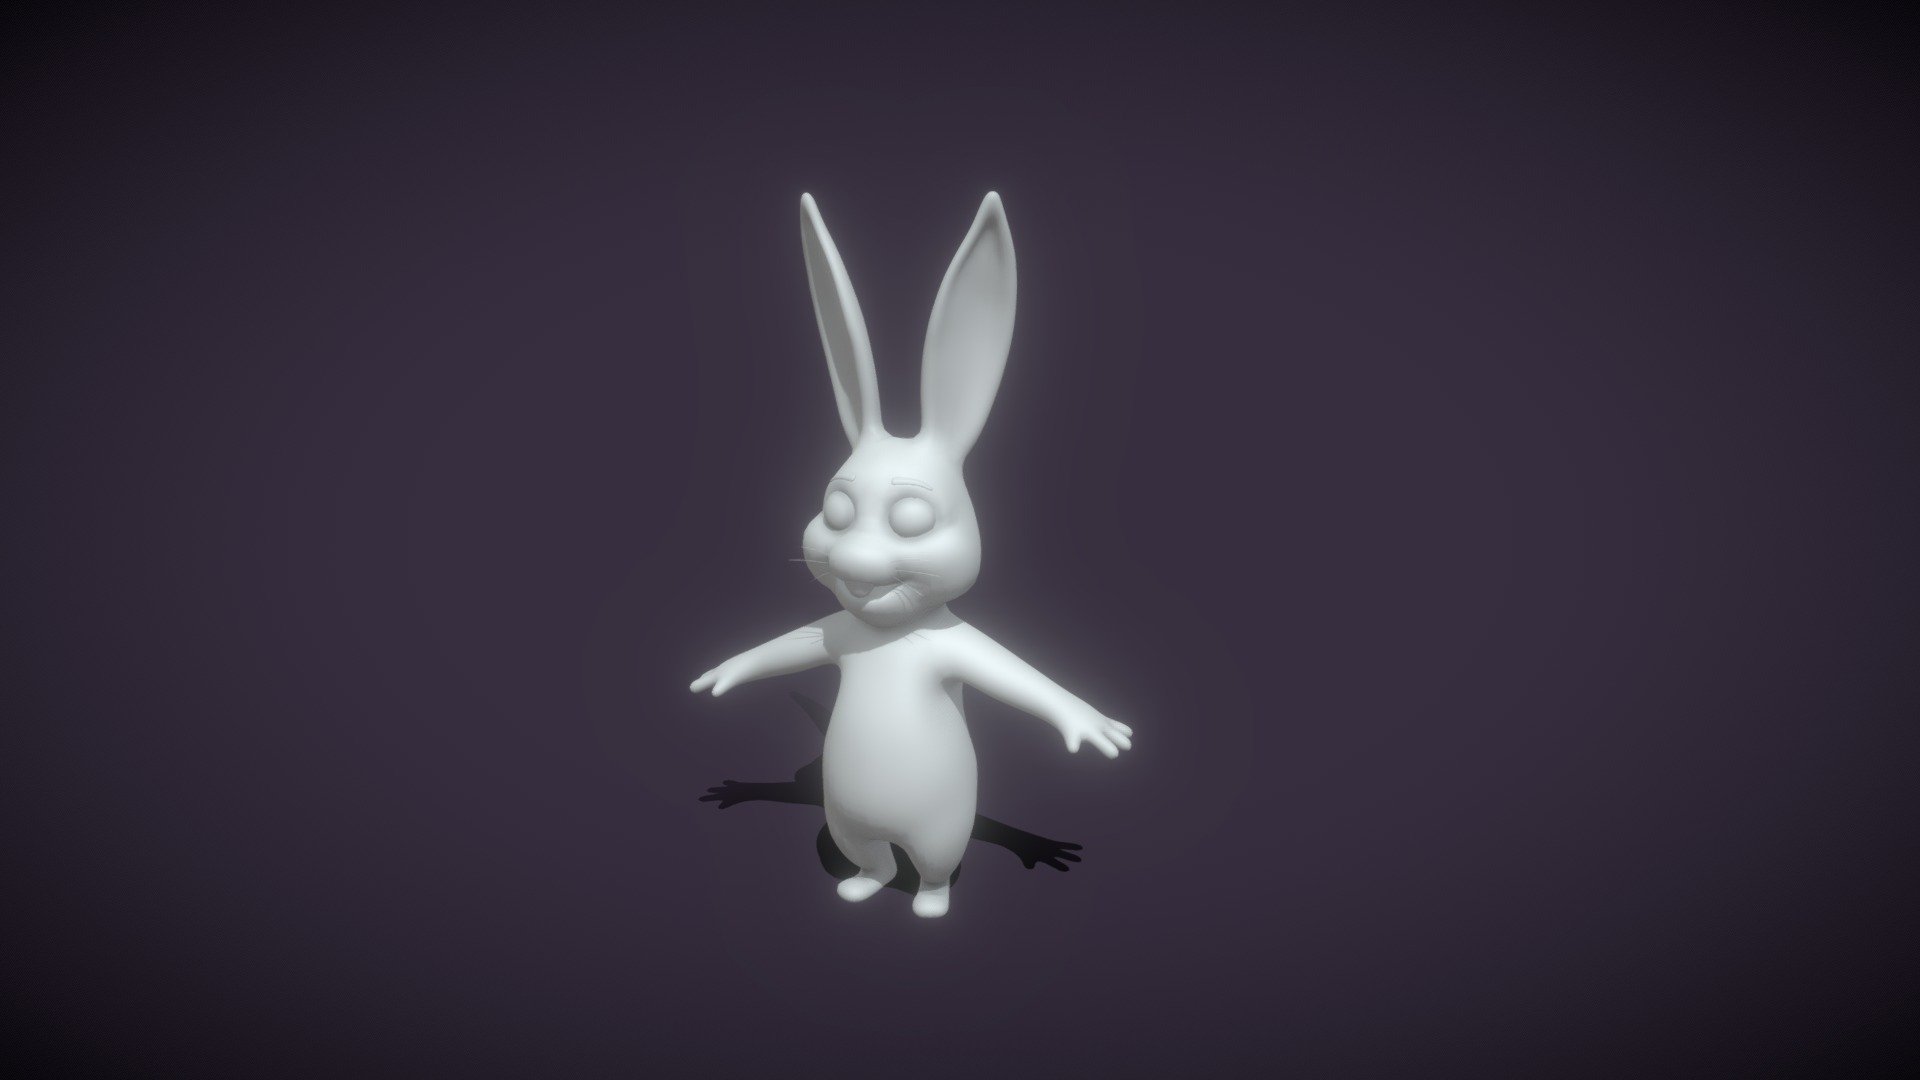 Cartoon Rabbit Rigged Base Mesh 3D Model is completely ready to be used as a starting point to develop your characters.  

Good topology ready for animation.  

Technical details:  




File formats included in the package are: FBX, GLB, BLEND, gLTF (generated), USDZ (generated)

Native software file format: BLEND

Render engine: Eevee

Polygons: 7,968

Vertices: 7,922

The model is rigged.
 - Cartoon Rabbit Rigged Base Mesh 3D Model - Buy Royalty Free 3D model by 3DDisco 3d model